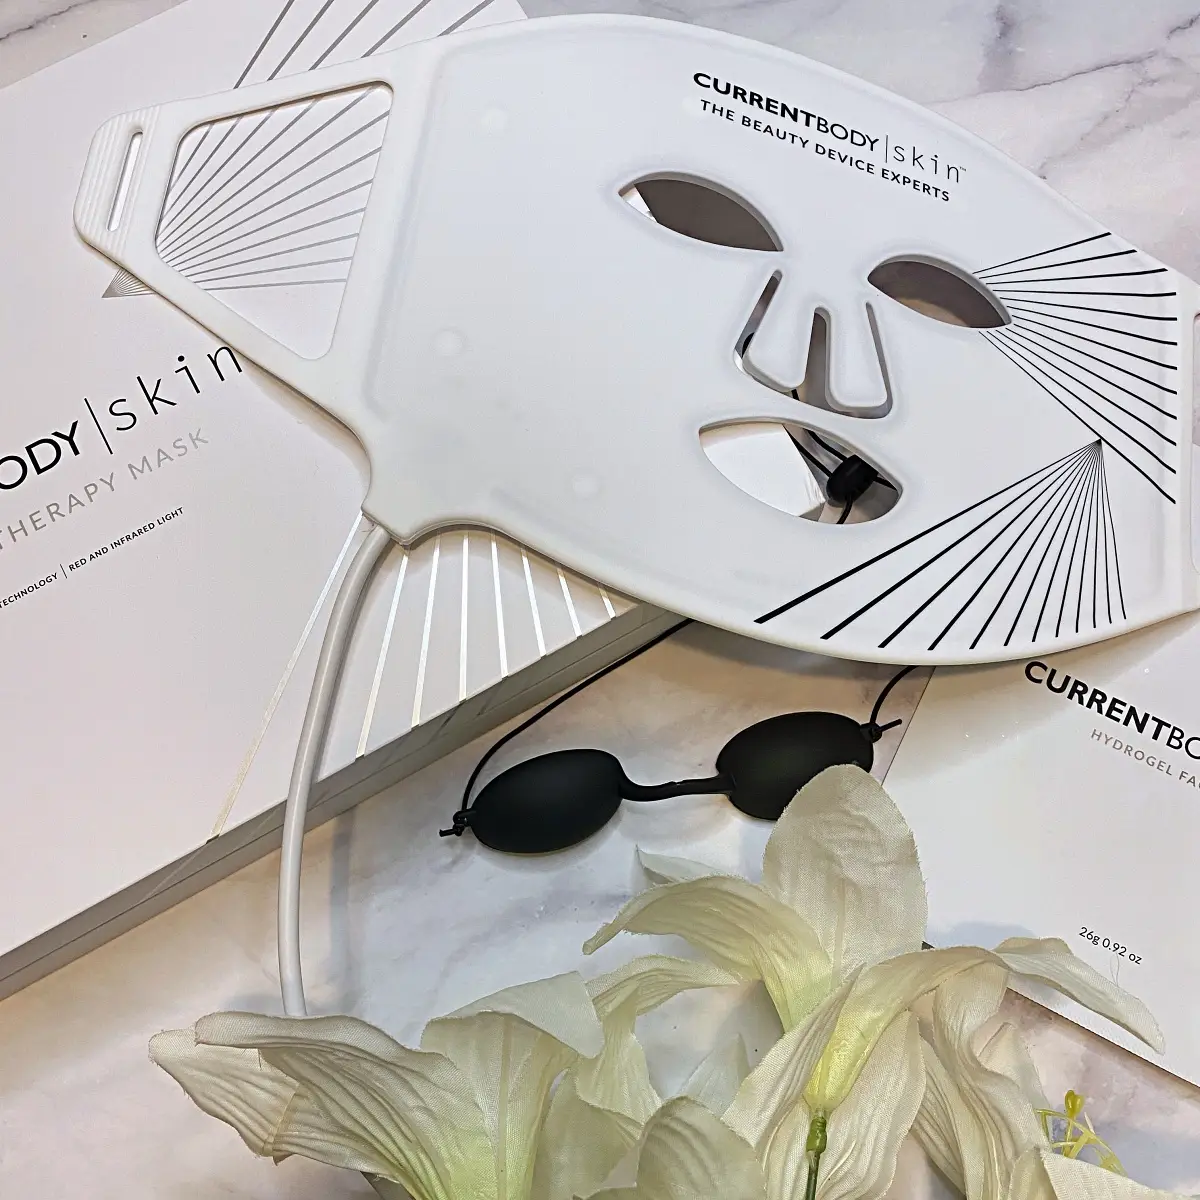 CurrentBody Skin LED Light Therapy Mask review